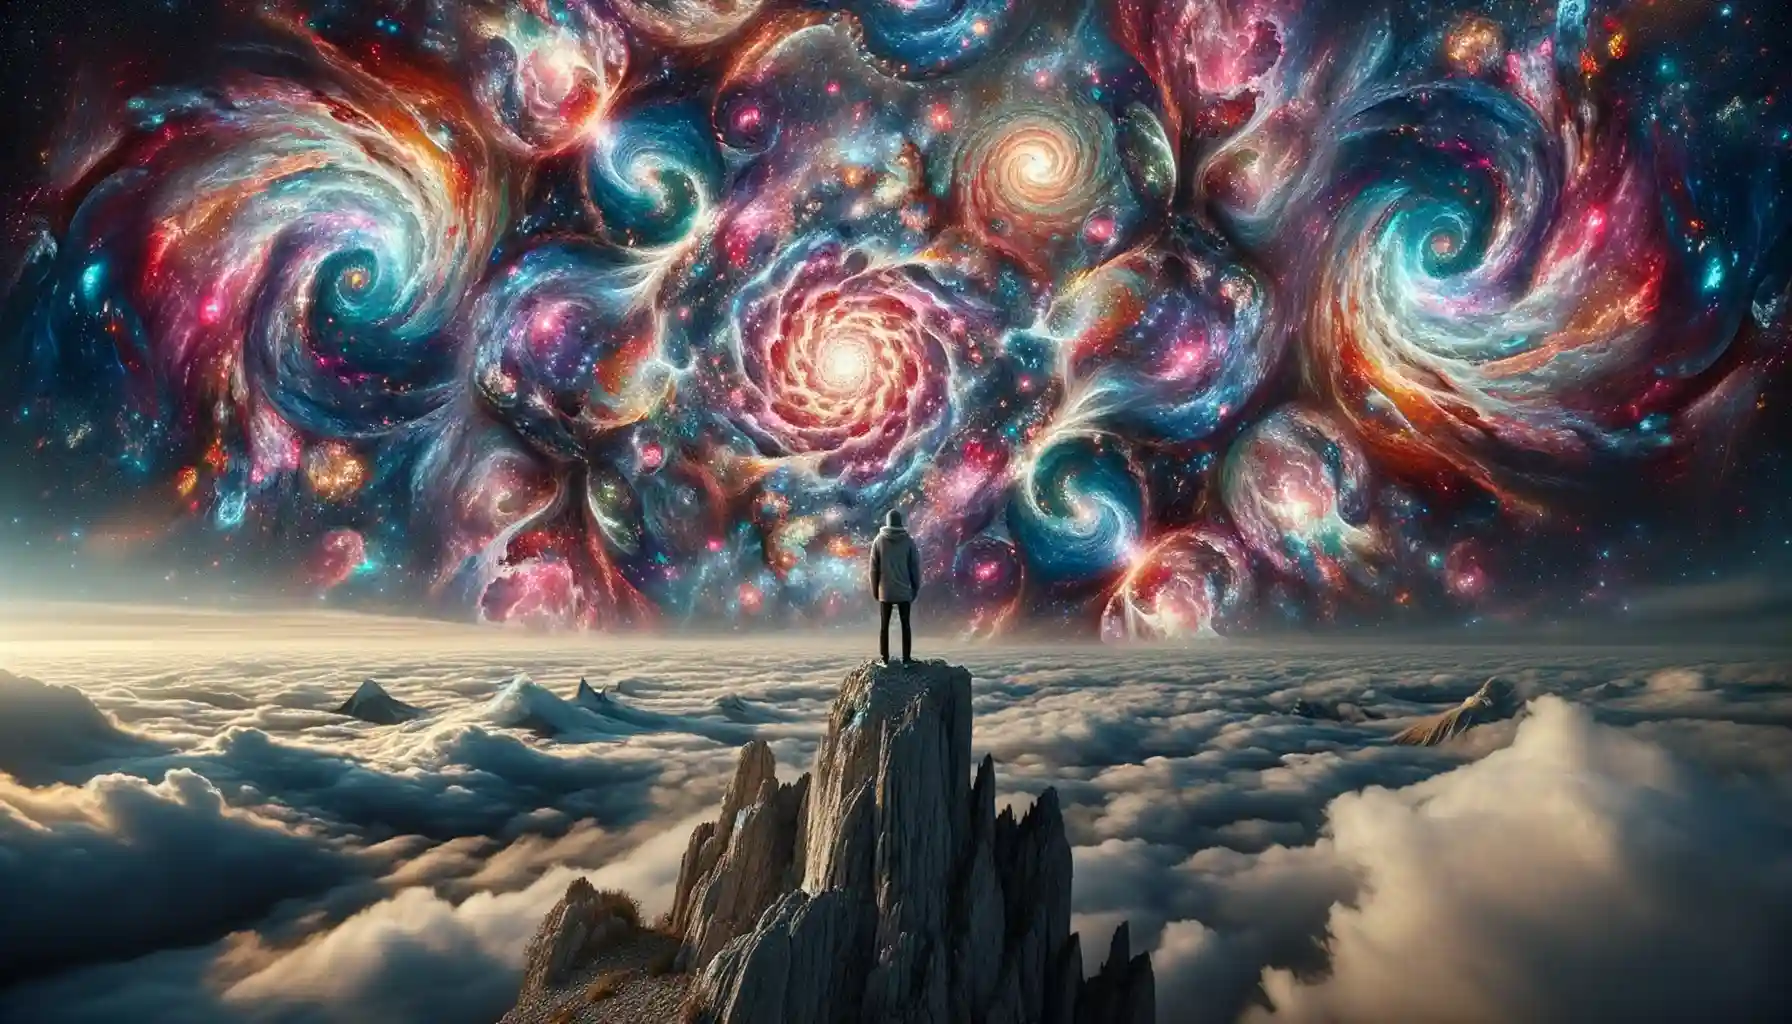 illustration of a person standing on a mountain looking out at a mesmerizing sky where multiple universes overlap creating a kaleido